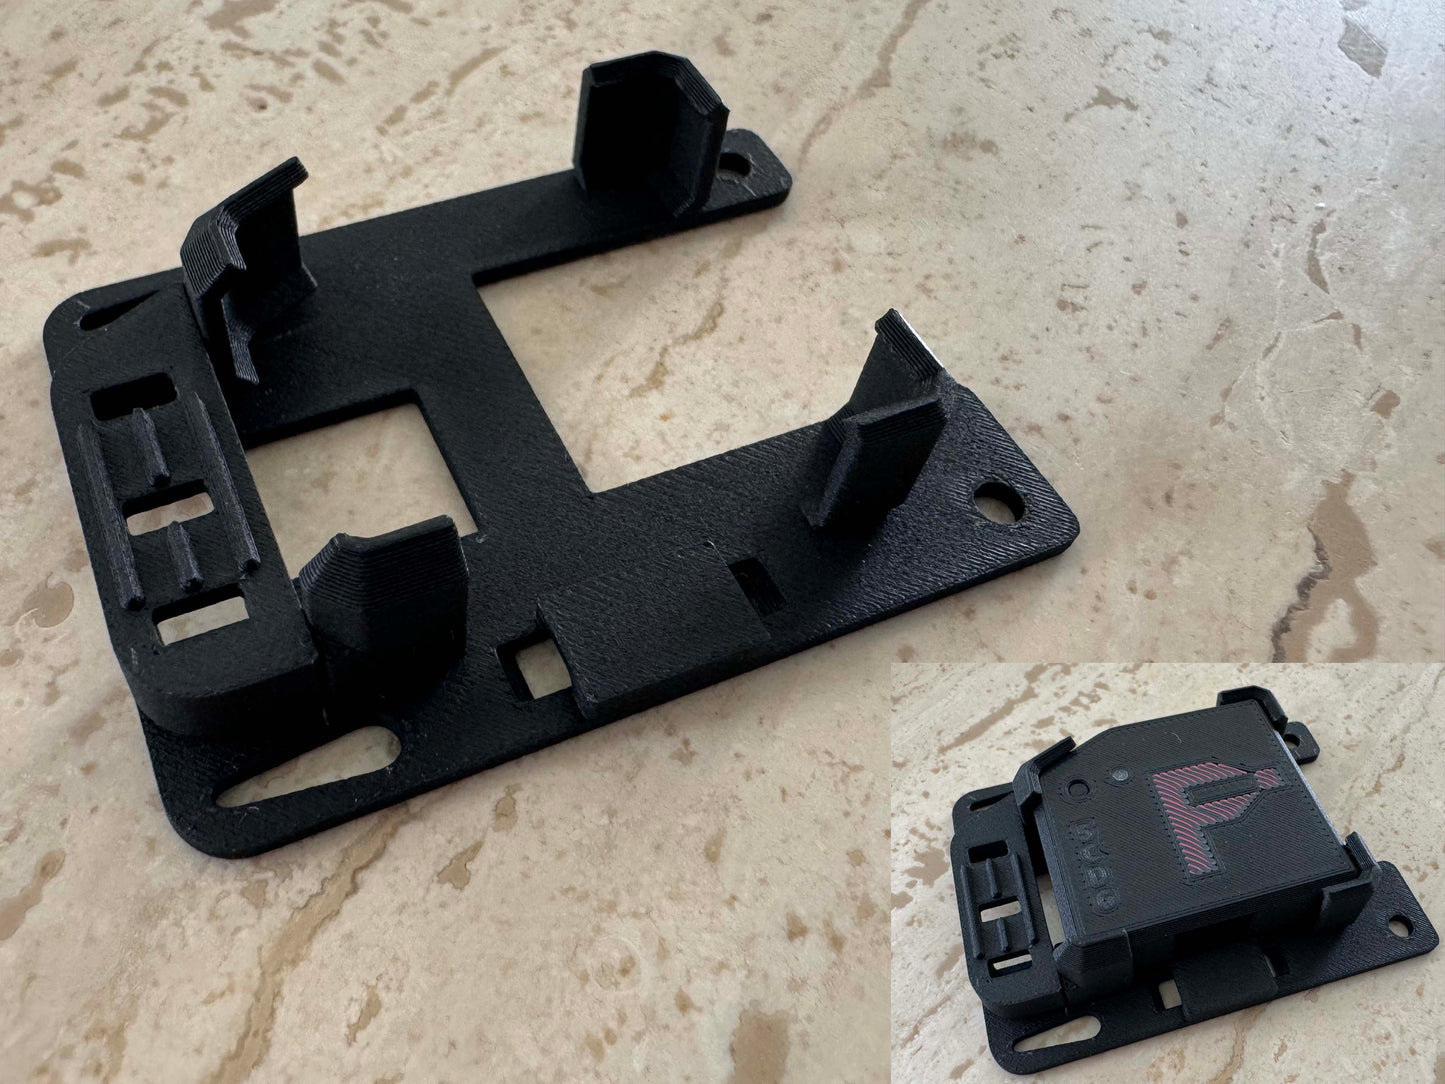 Mounting Cradle for Slim Cases